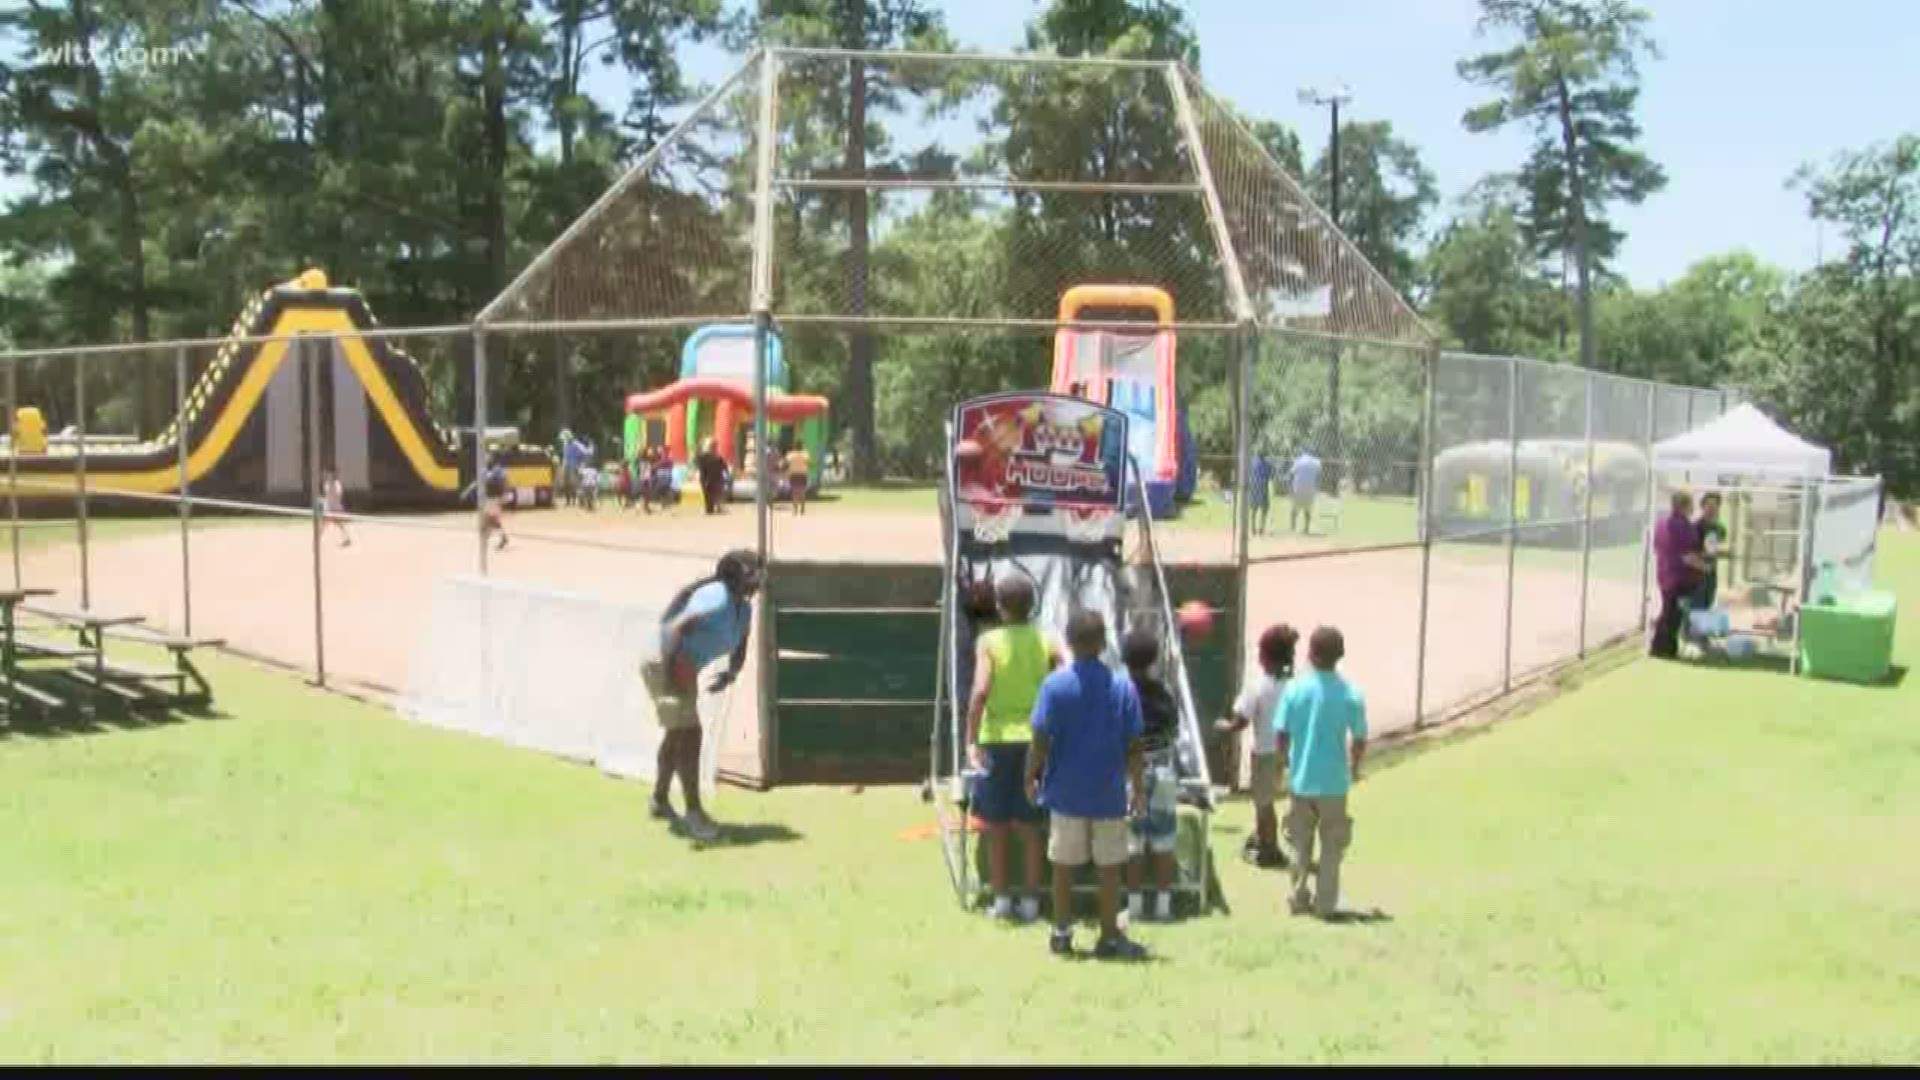 Columbia Mayor Steve Benjamin hosted the fourth annual Father's Day cookout.